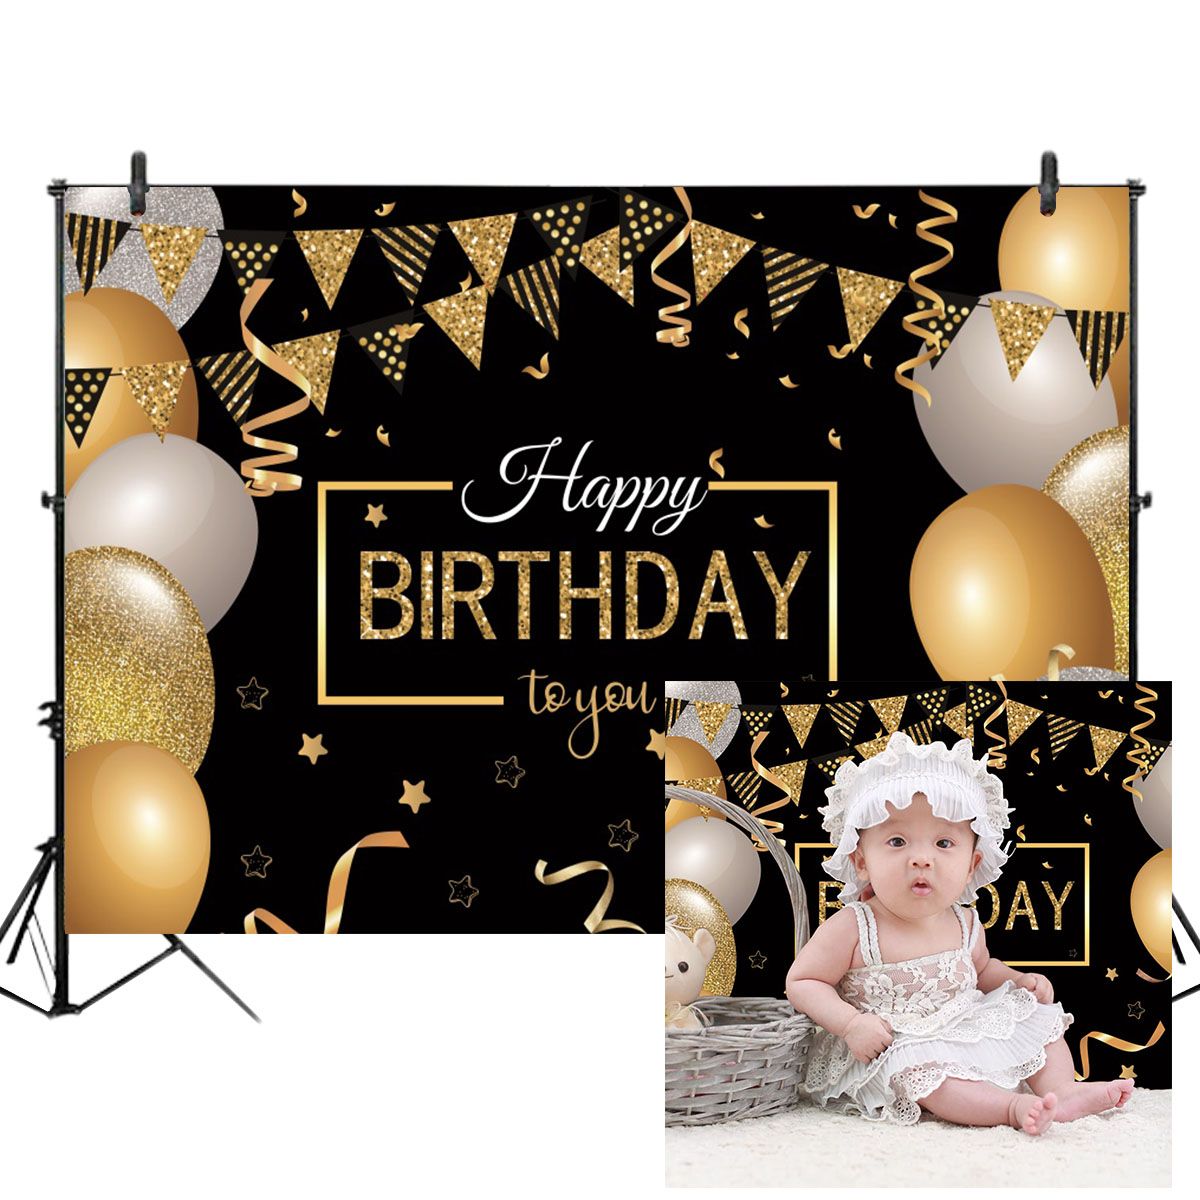 5x3FT-7x5FT-9x6FT-Gold-Balloons-Happy-Birthday-Studio-Photography-Backdrops-Background-1680682